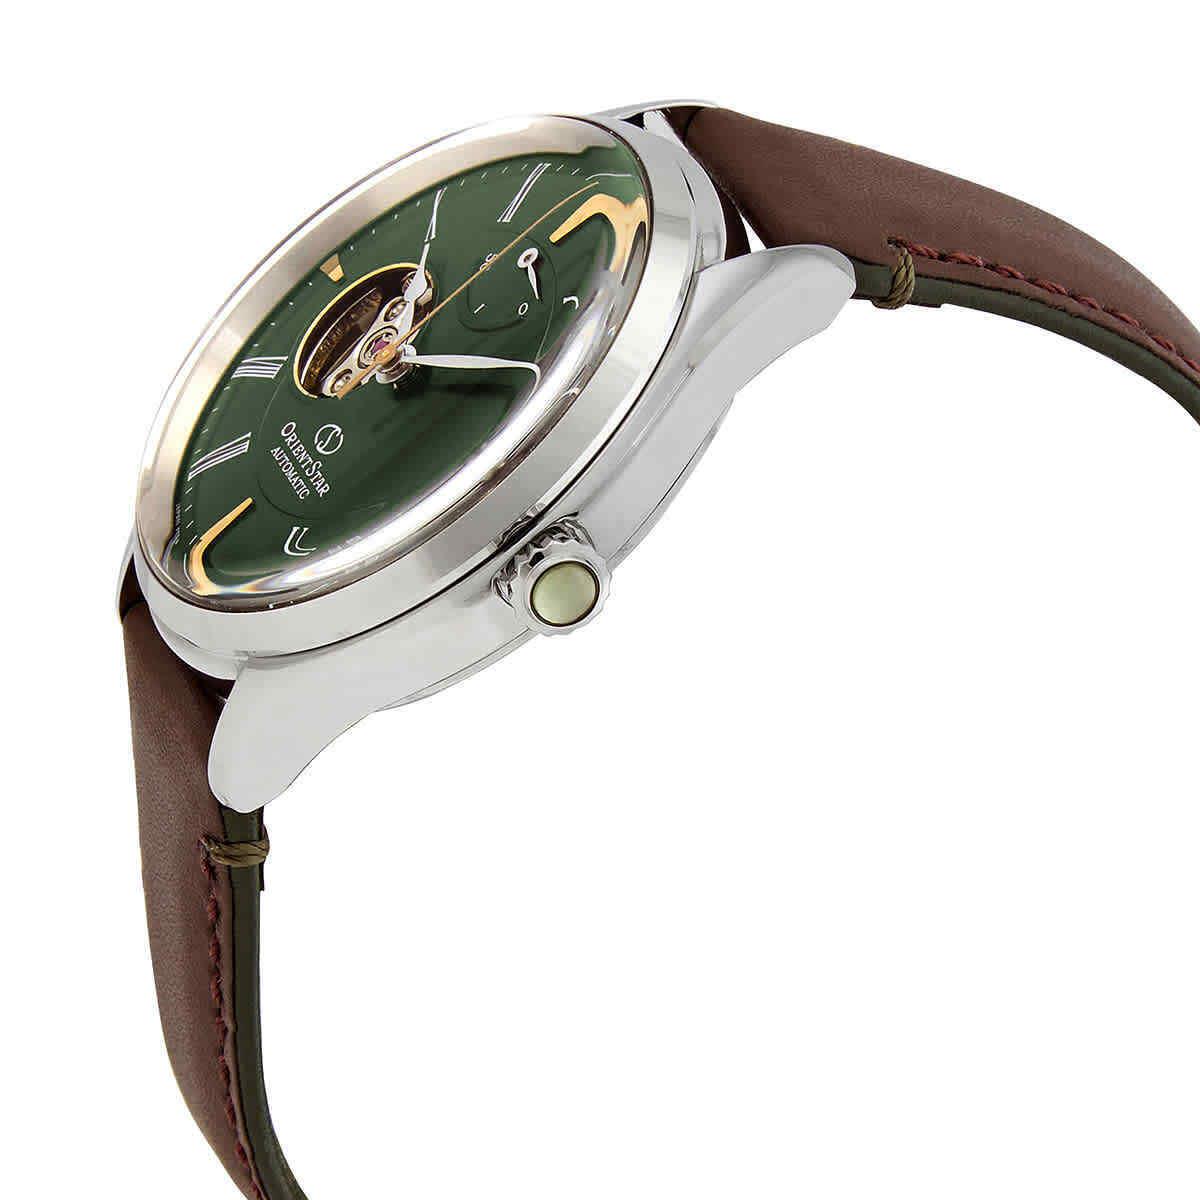 Orient Star Automatic Green Dial Men`s Watch RE-AT0202E00B